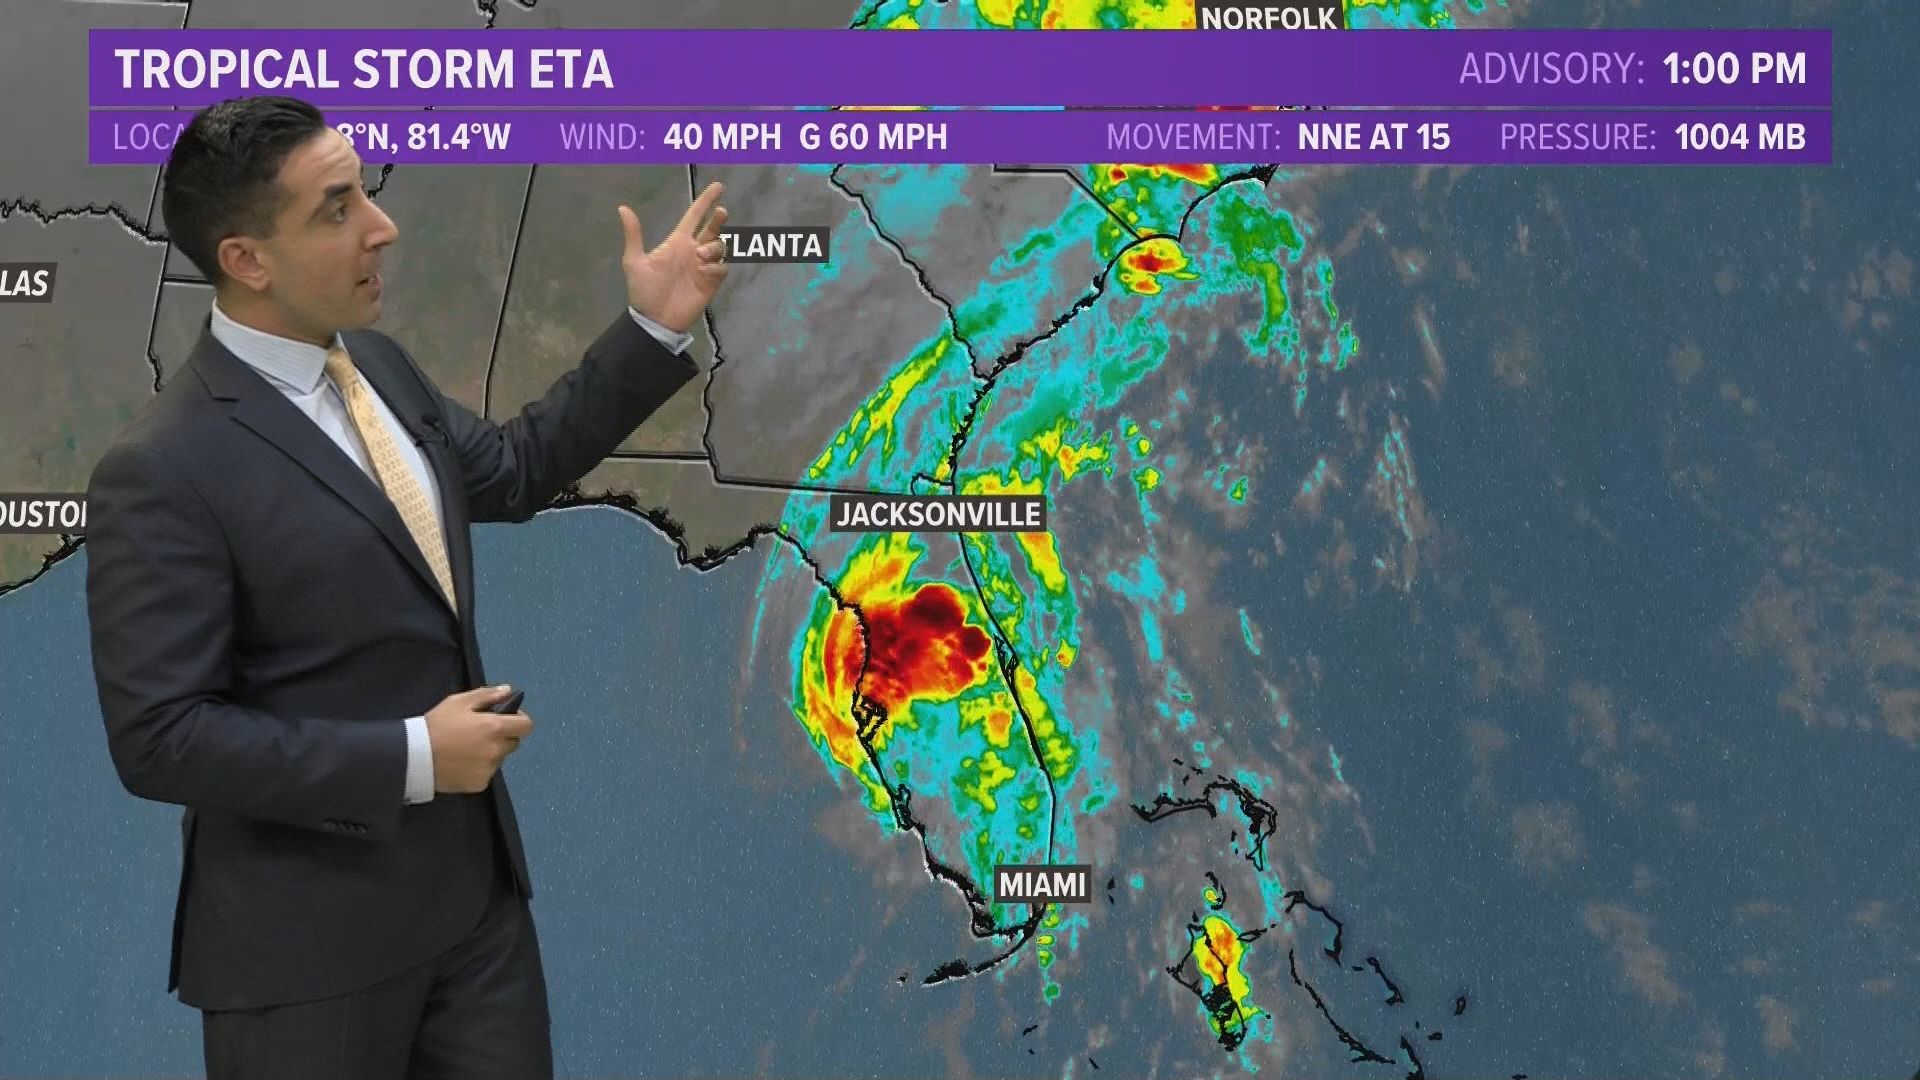 13News Now Meteorologist Tim Pandajis has the latest on Tropical Storm Eta as it moves away from Florida and back out to sea.